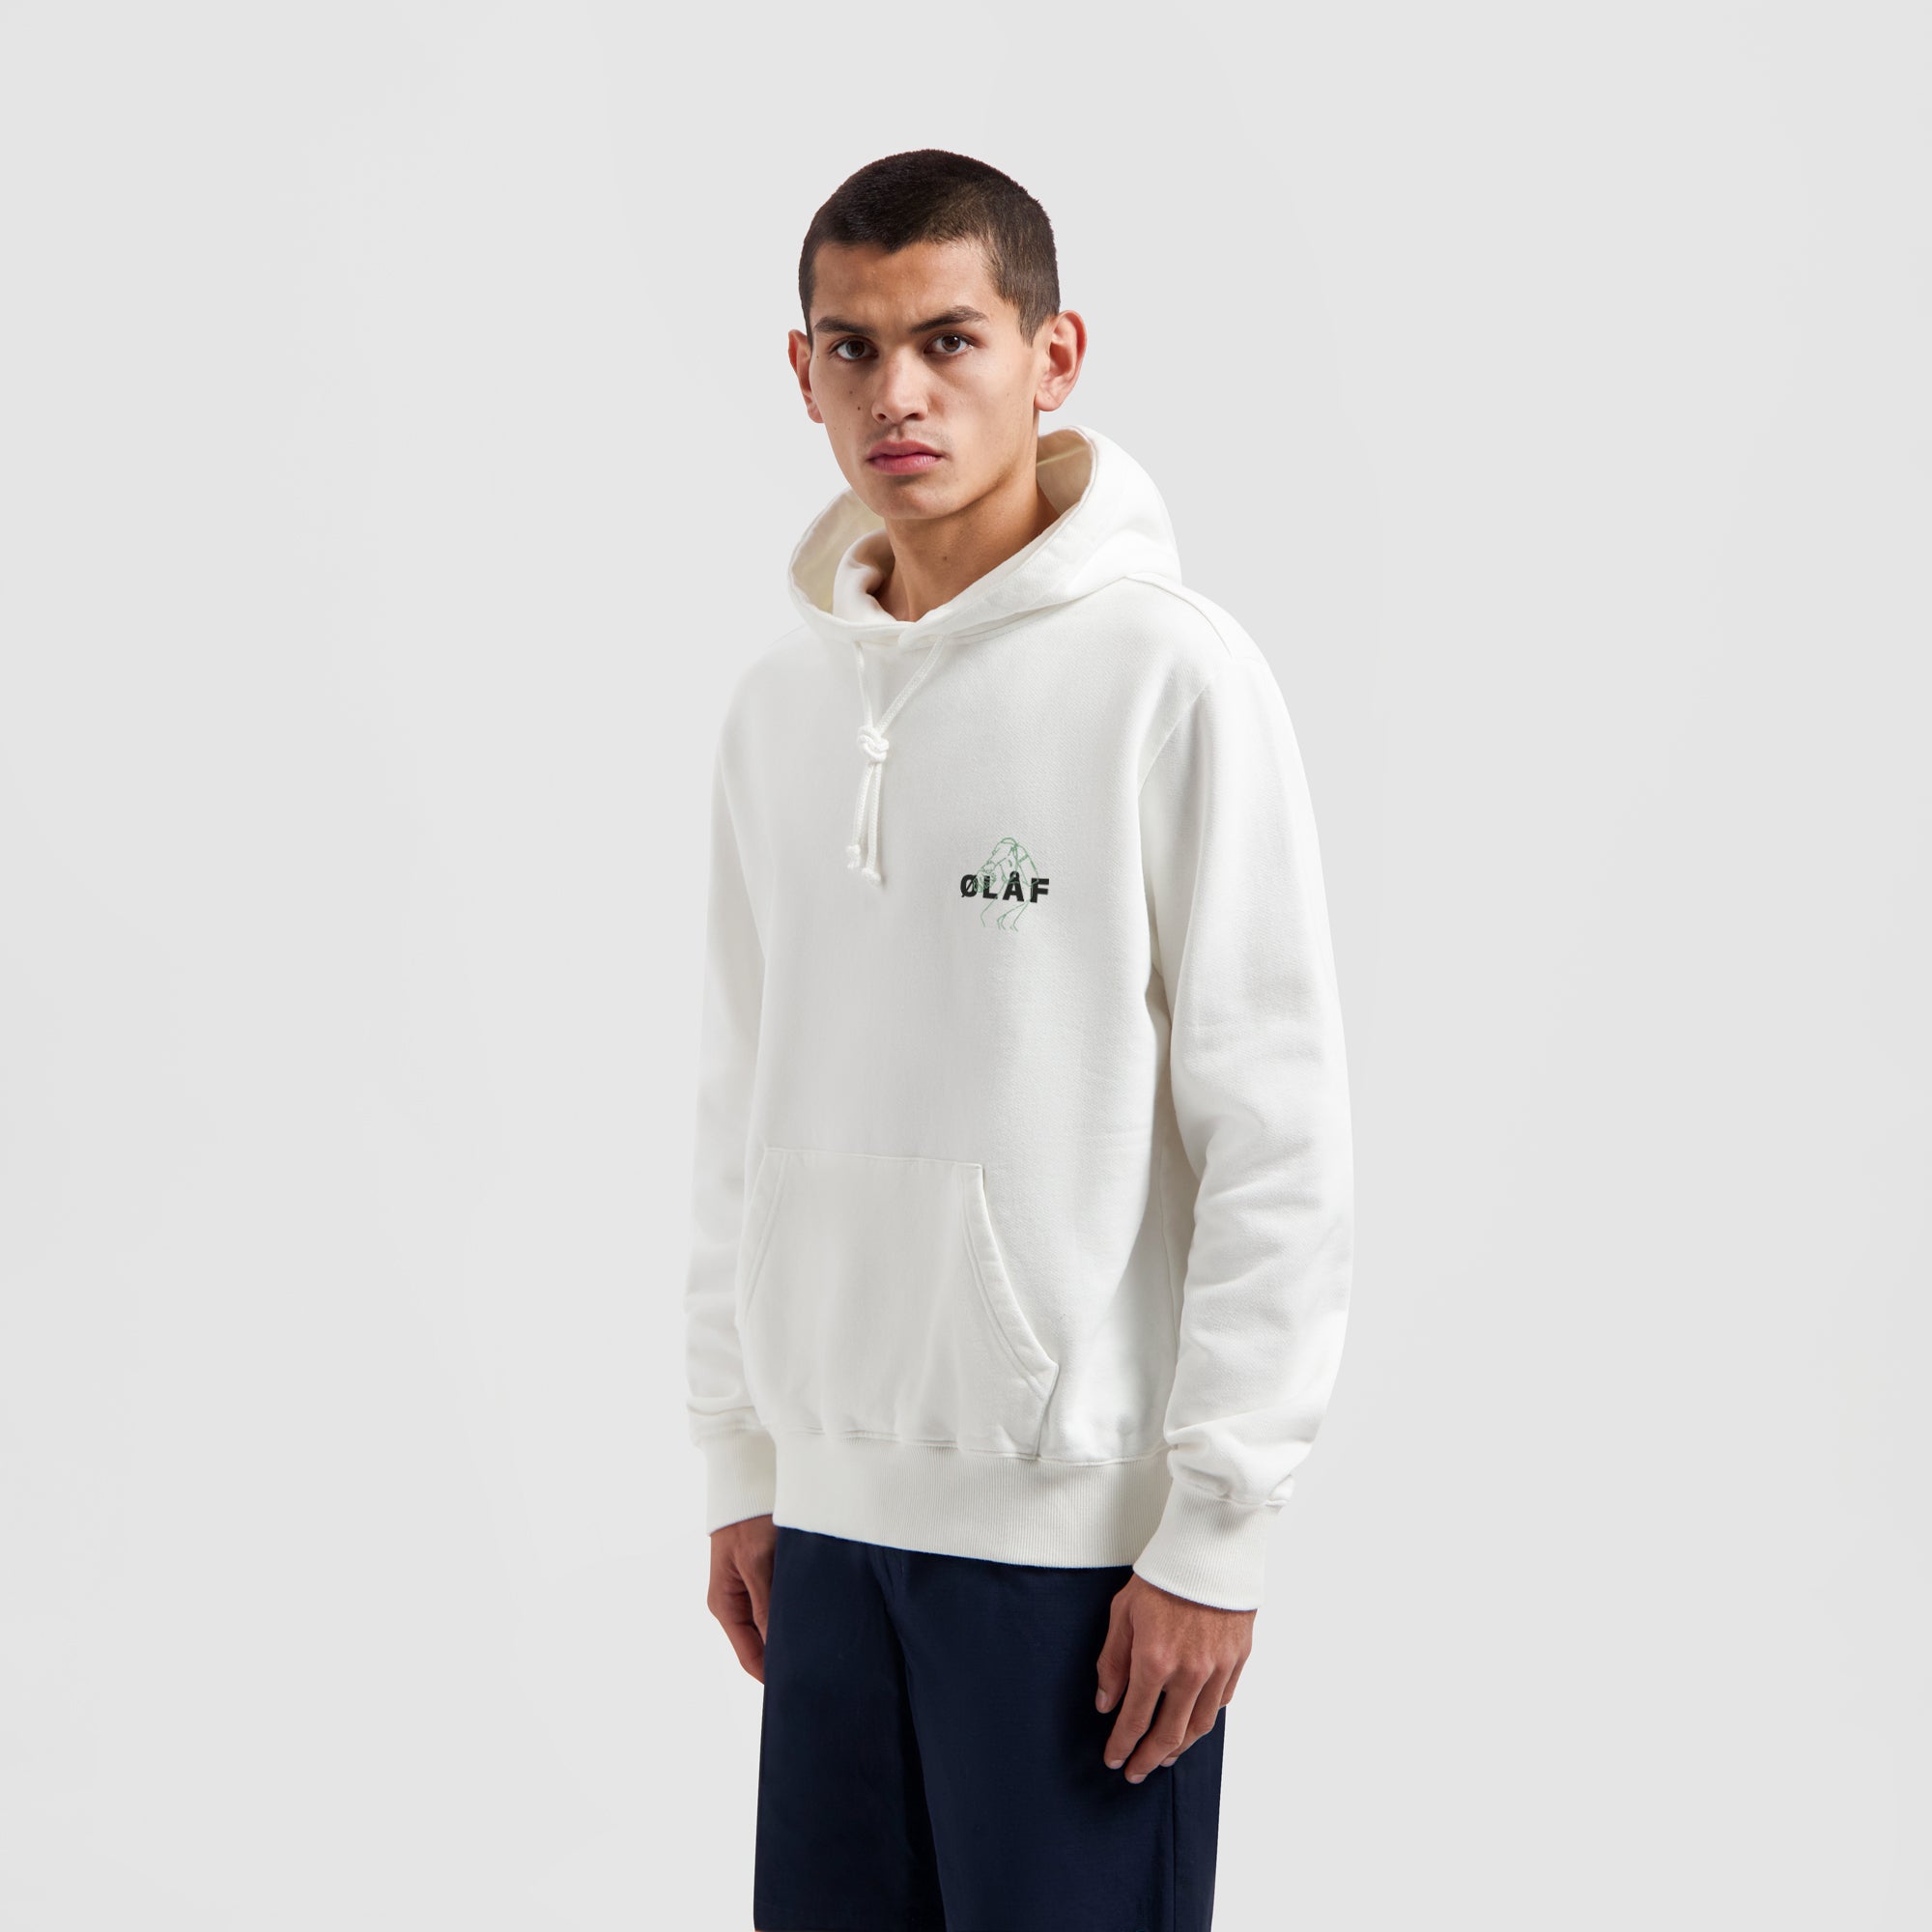 Diver Outline Hoodie - White